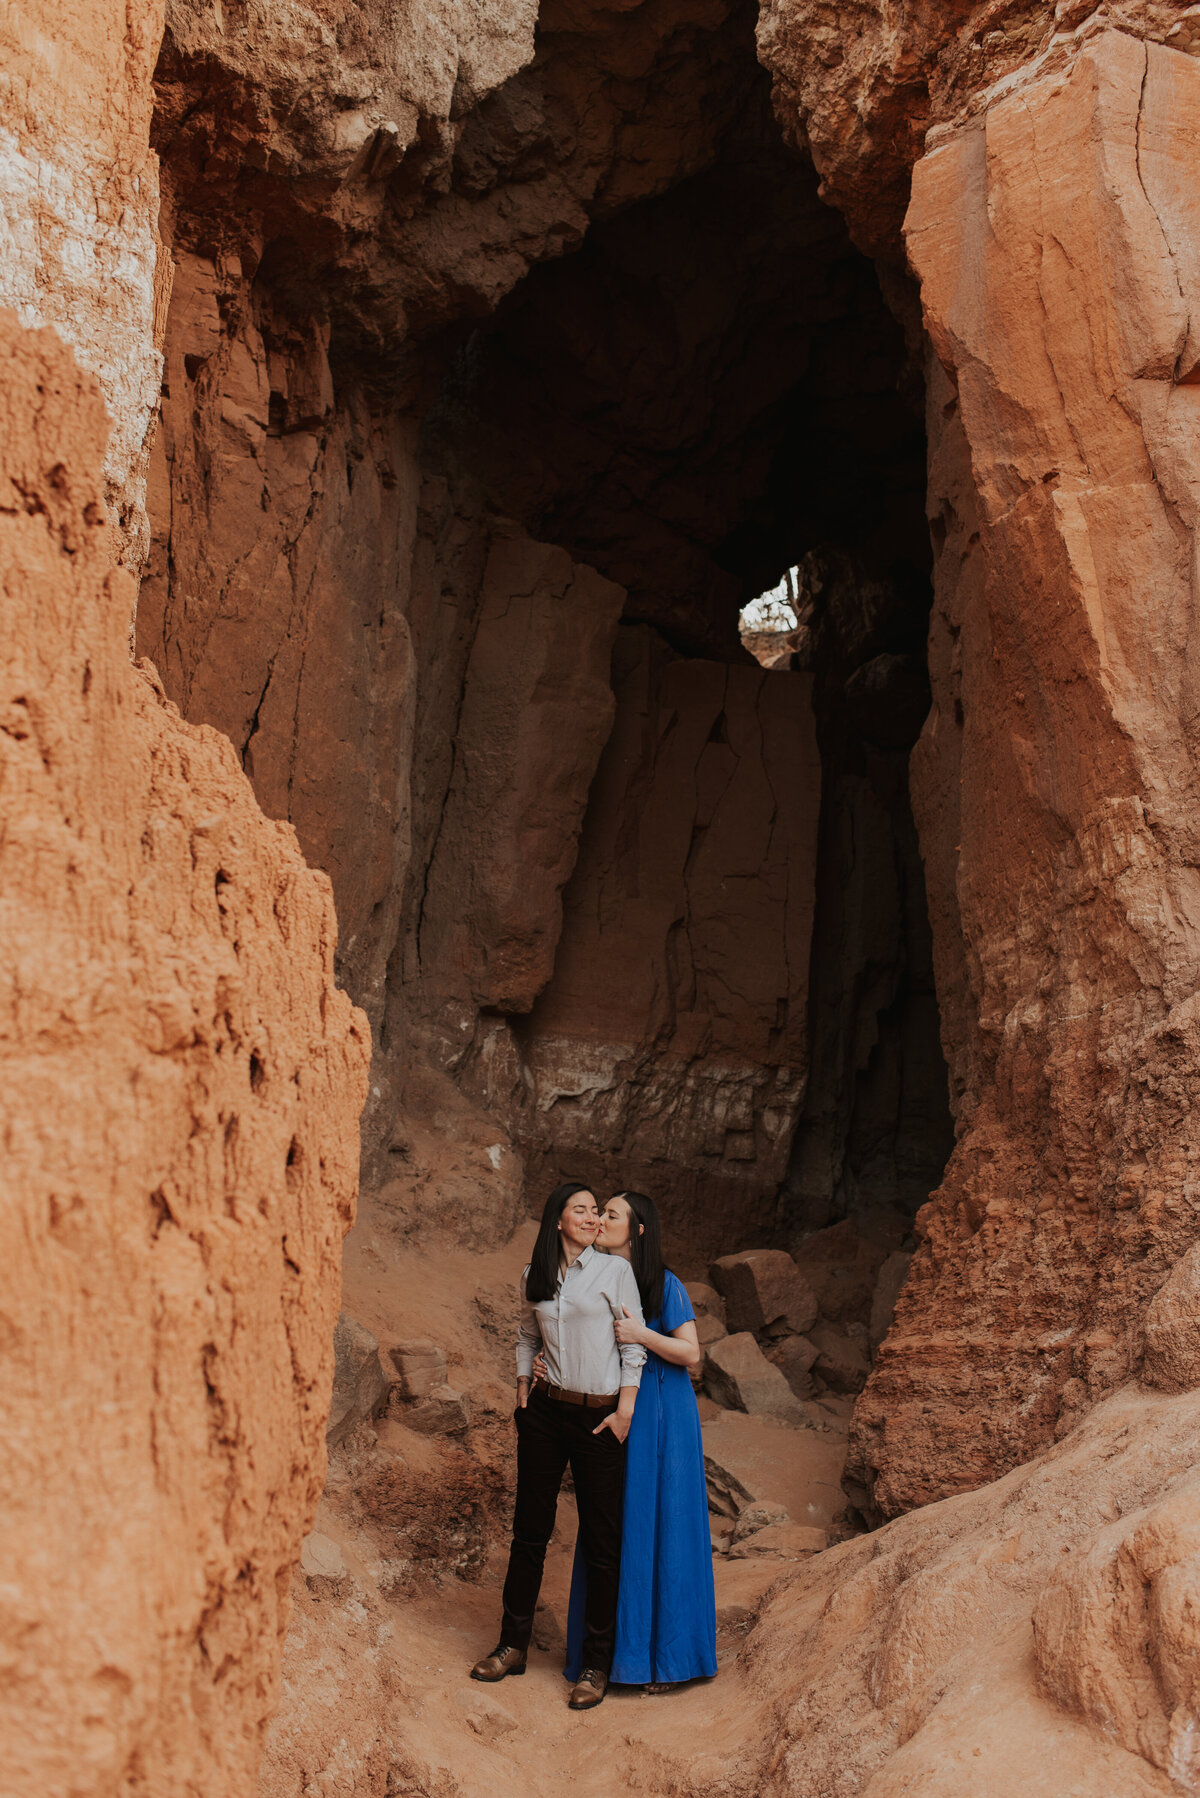 Jessica-and-Whitney-adventure-session-in-palo-duro-state-park-by-Bruna-kitchen-photography-4